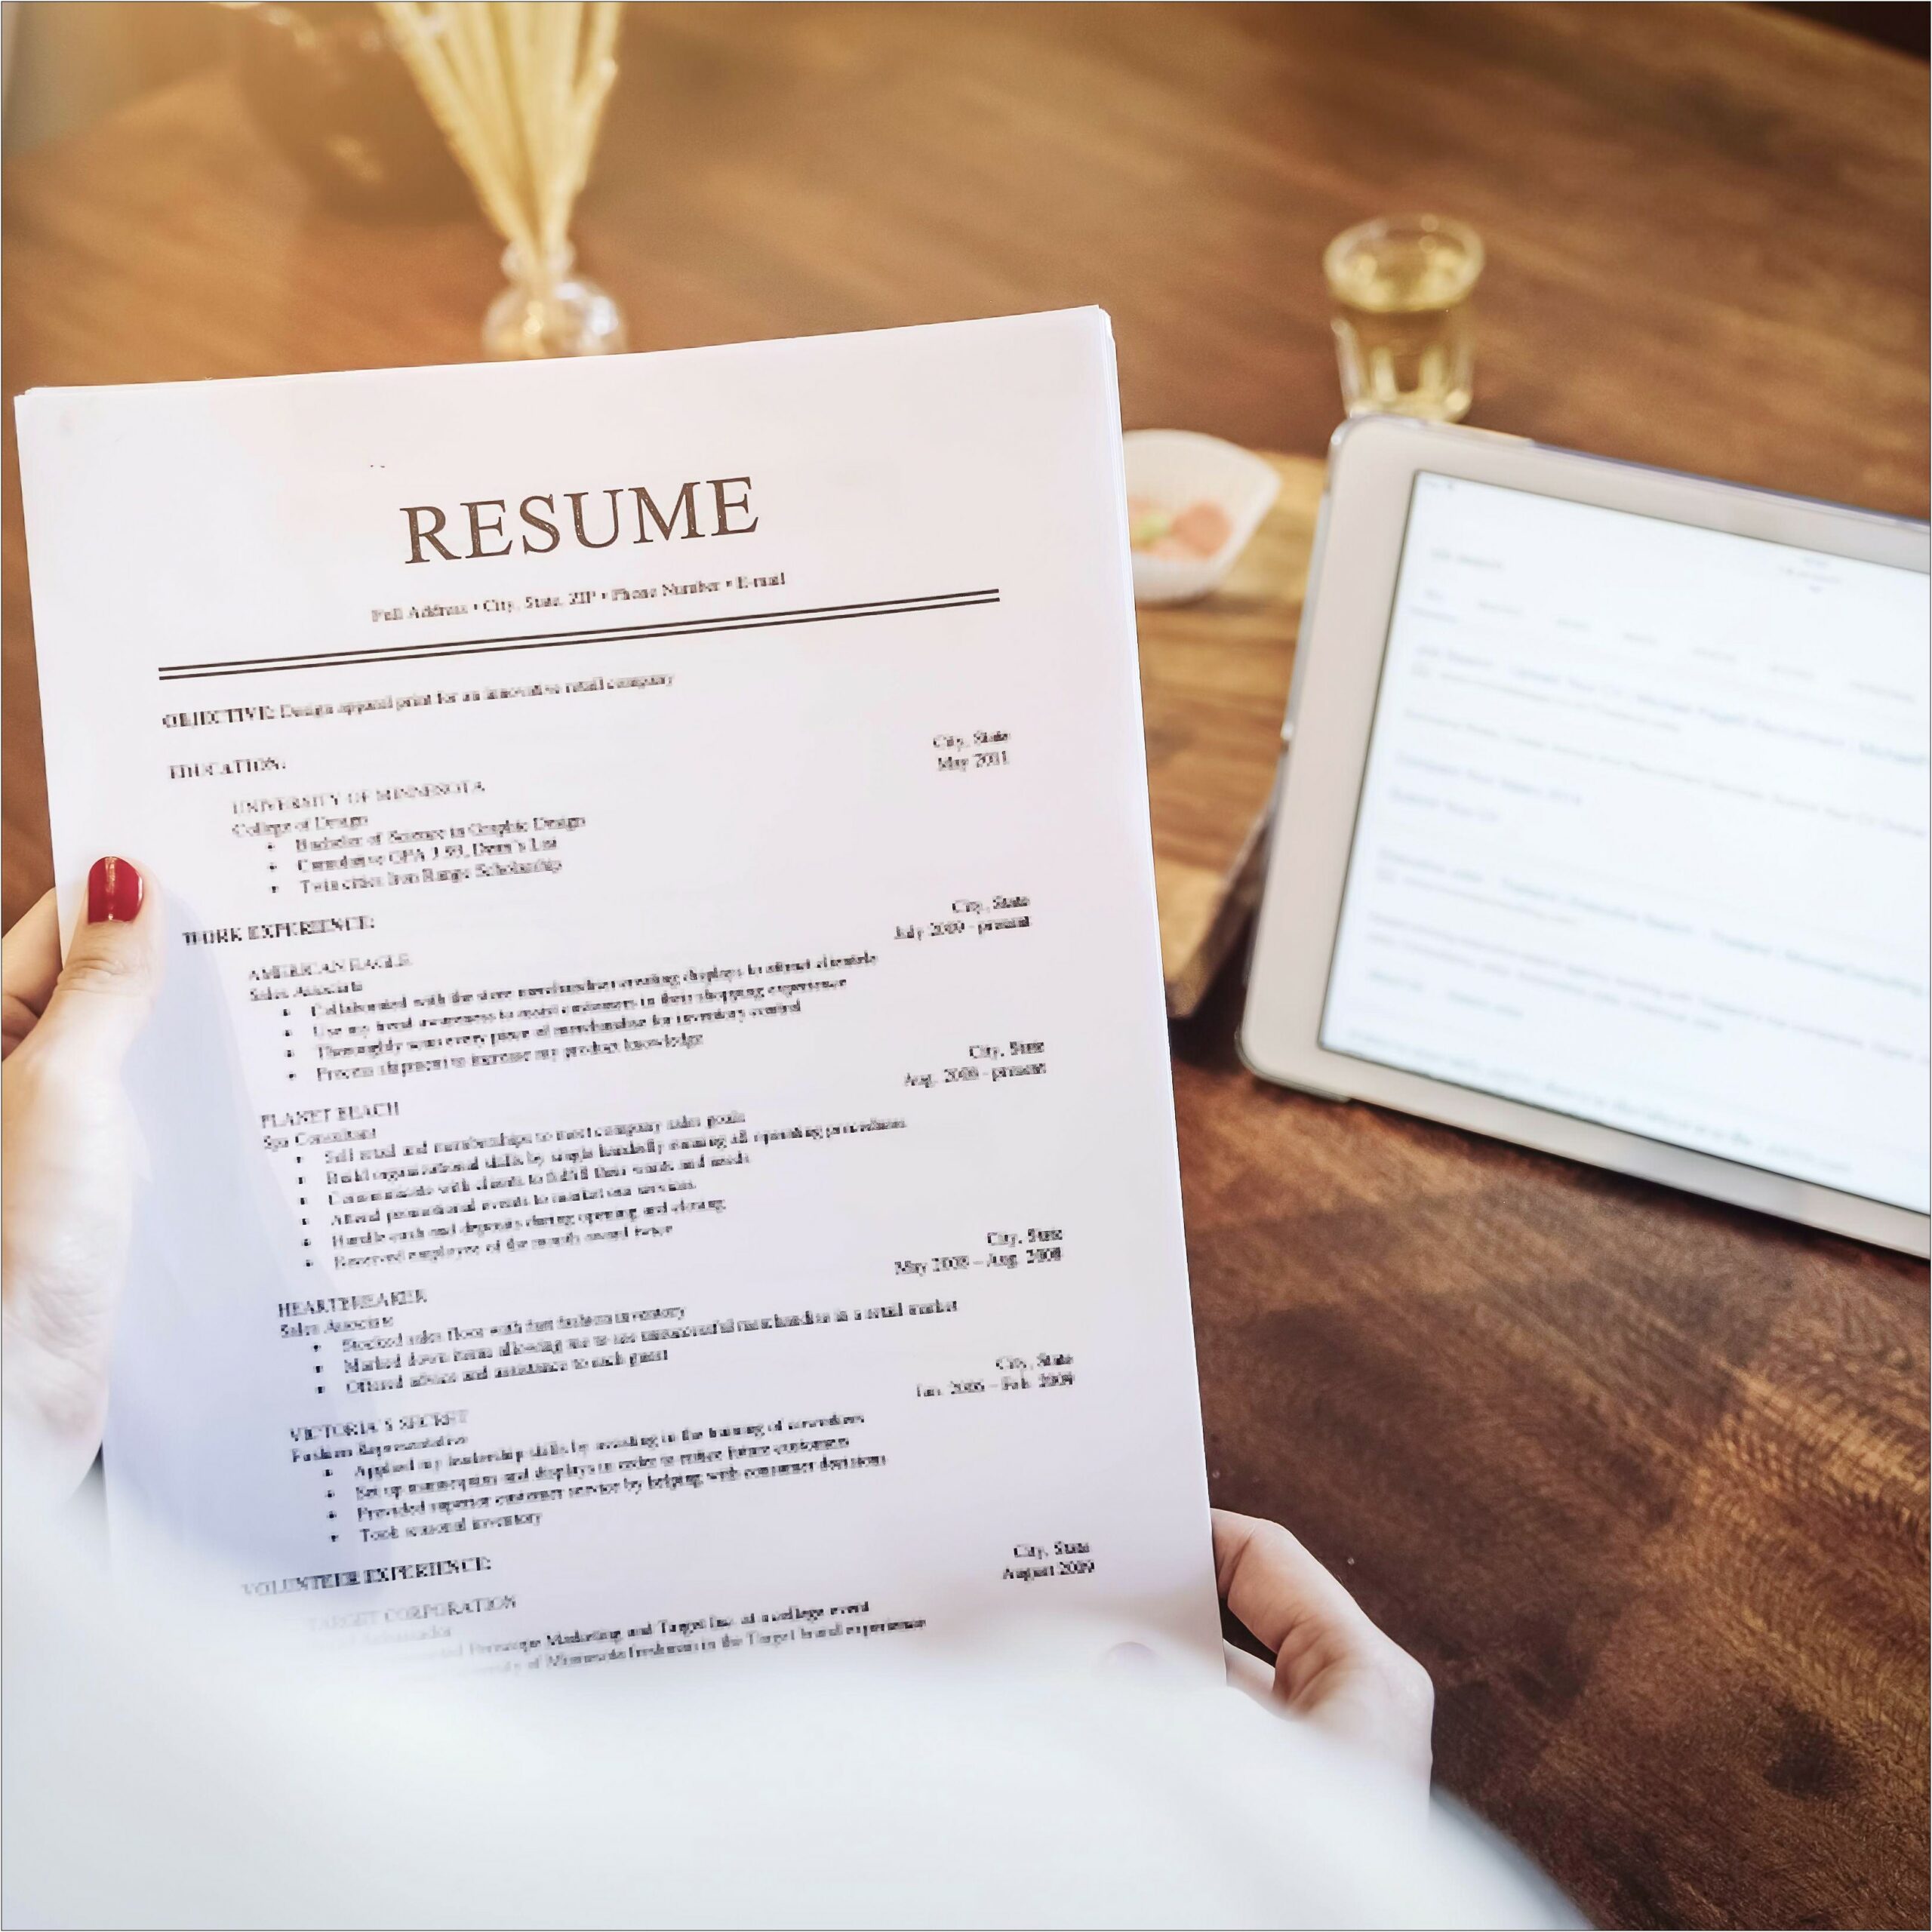 Certified Professional Resume Writers For Government Jobs